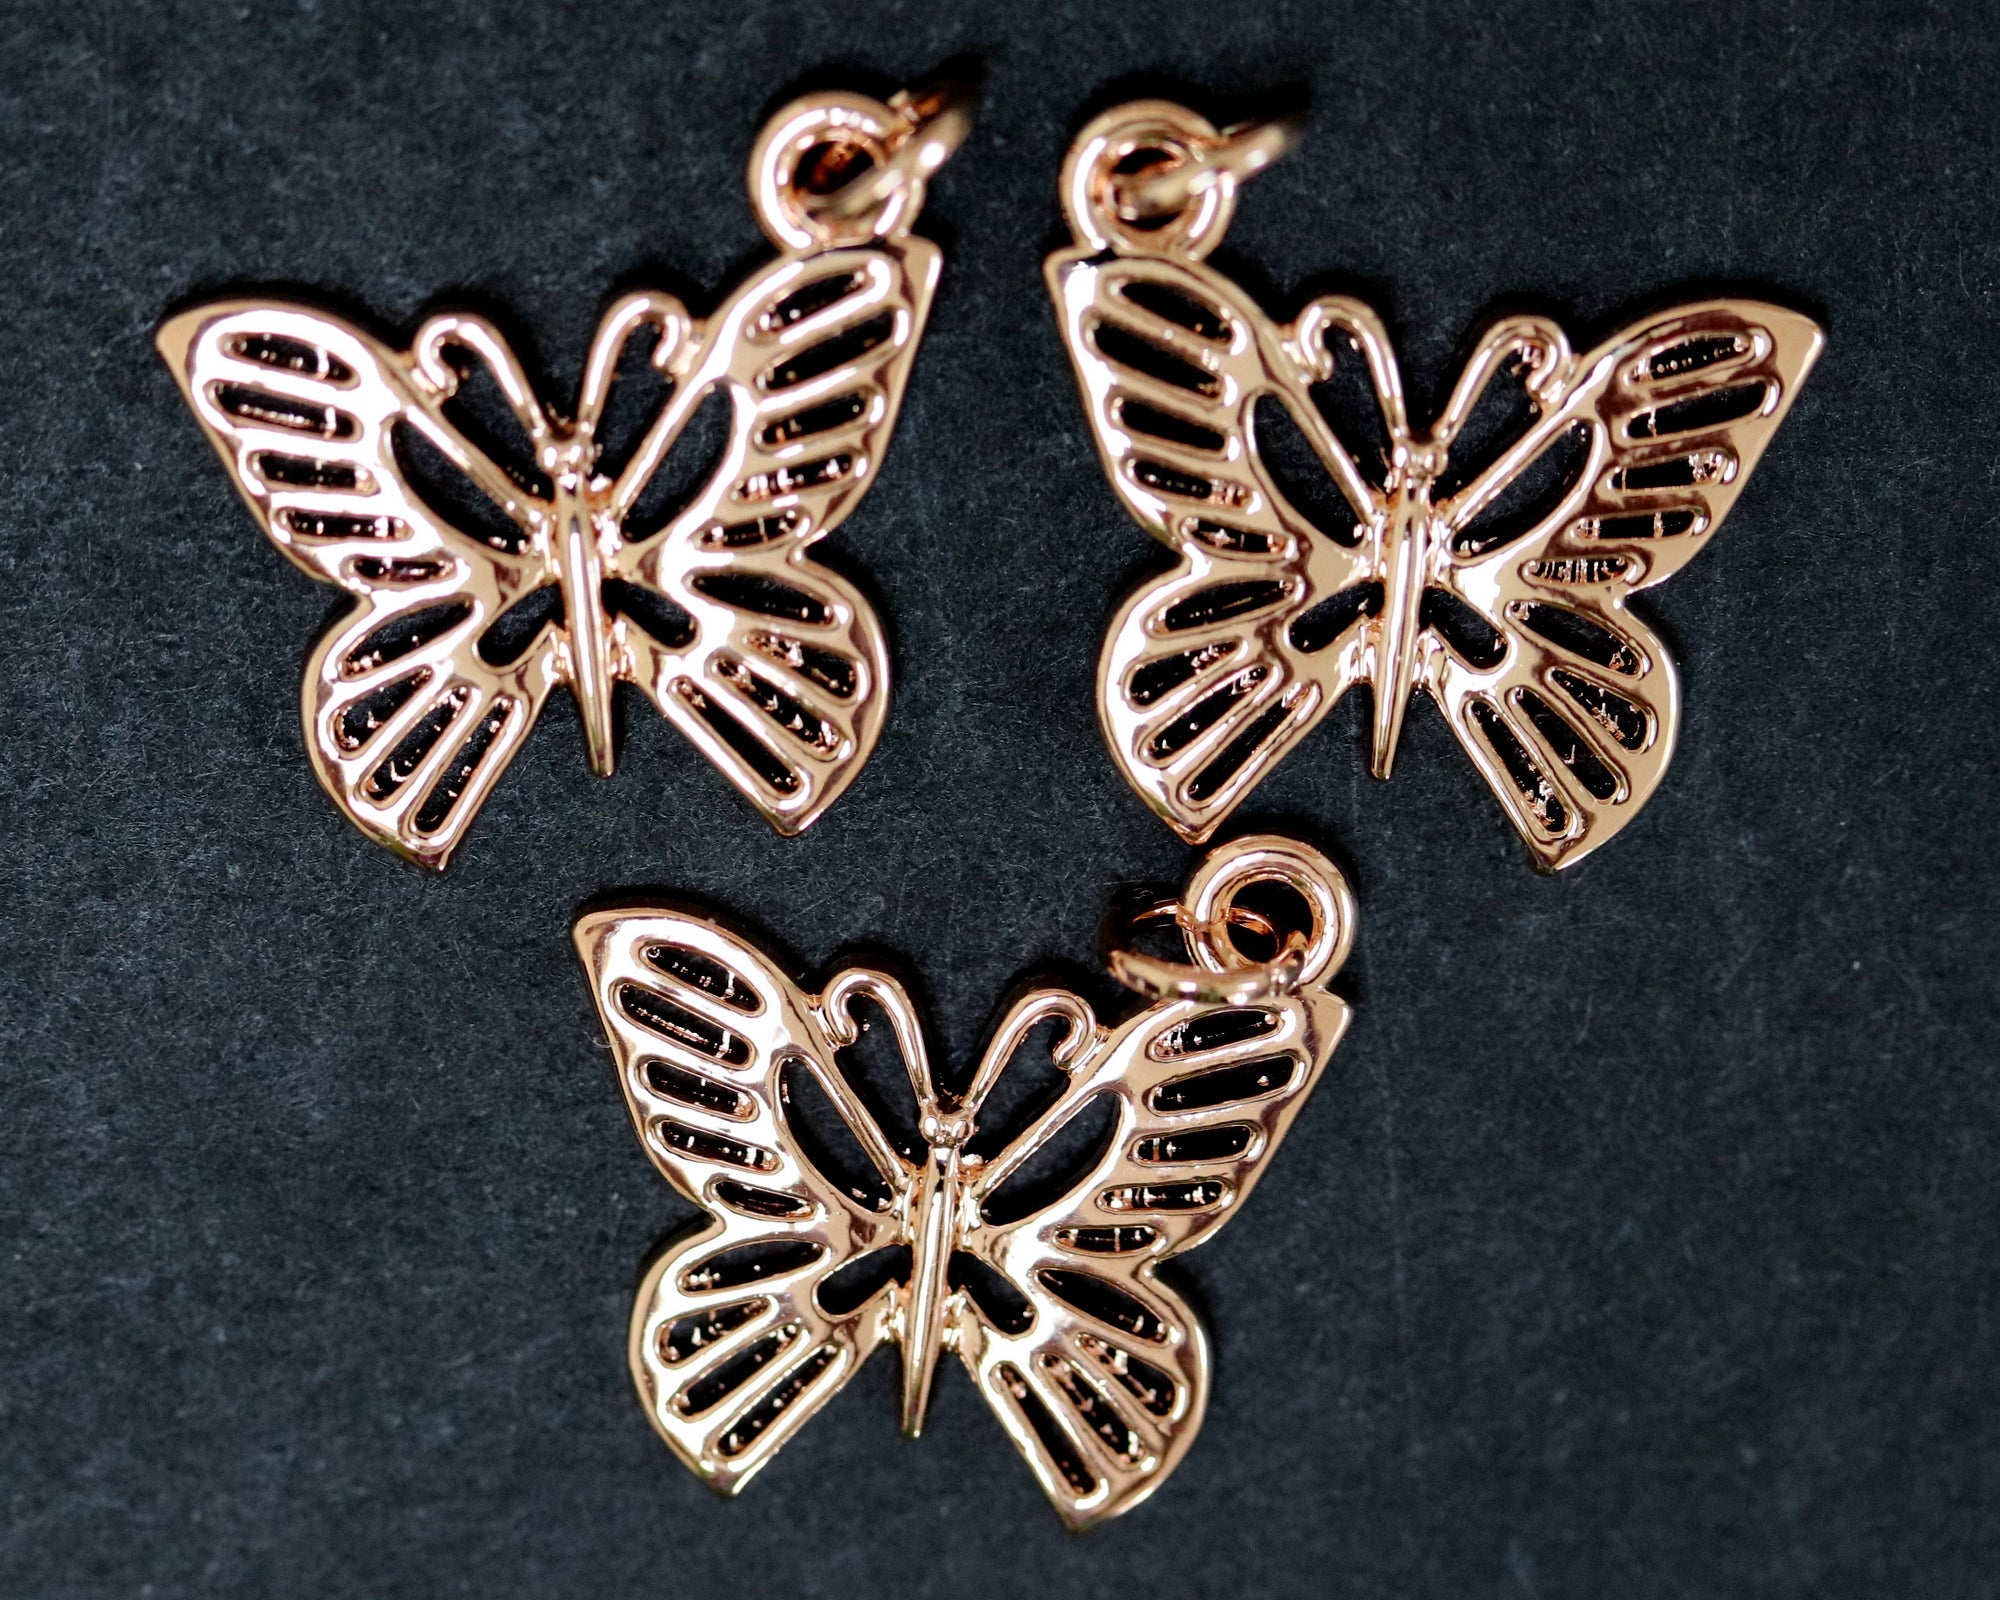 Butterfly charm 18x19mm 14K Rose Gold plated metal alloy pendant